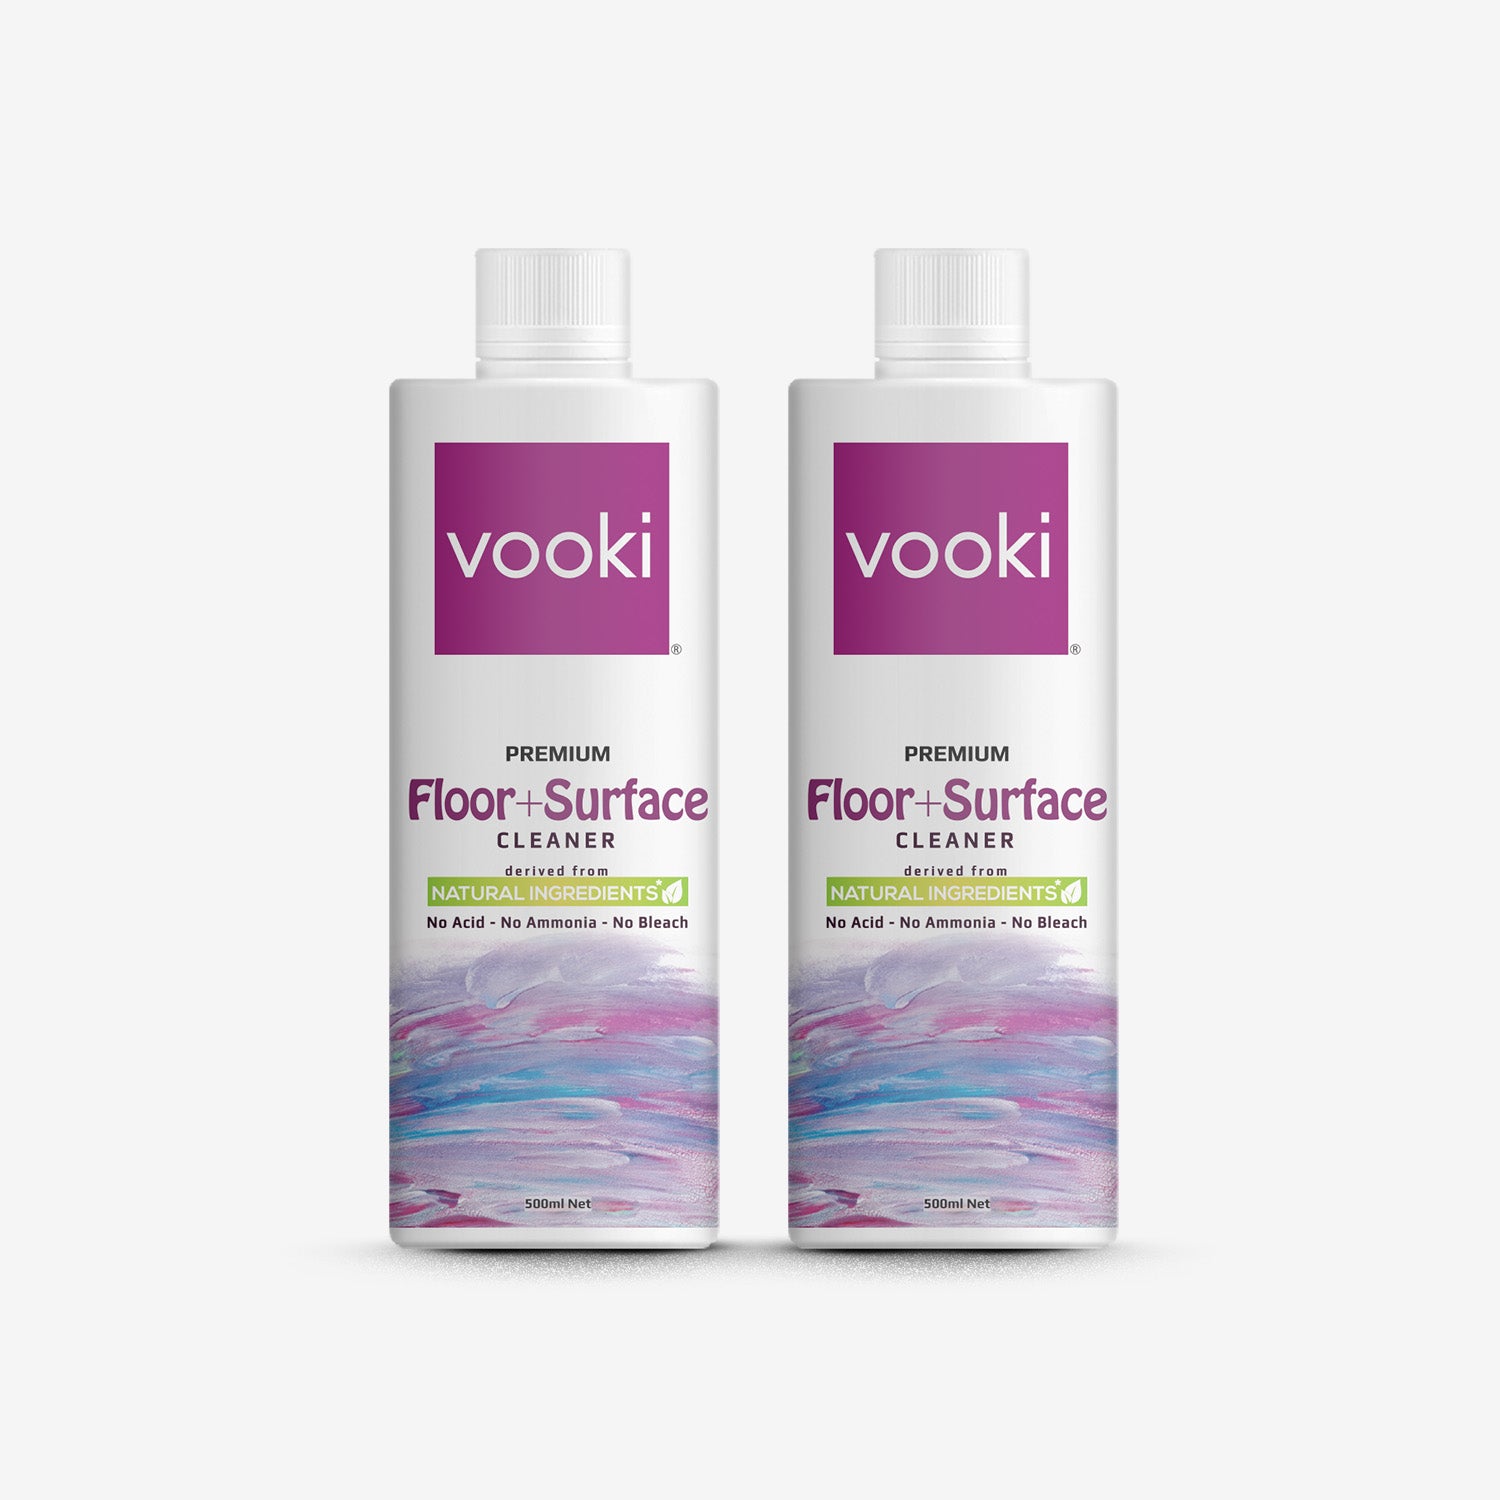 vooki floor surface cleaner - a bottle of cleaning solution for maintaining clean and shiny floors.